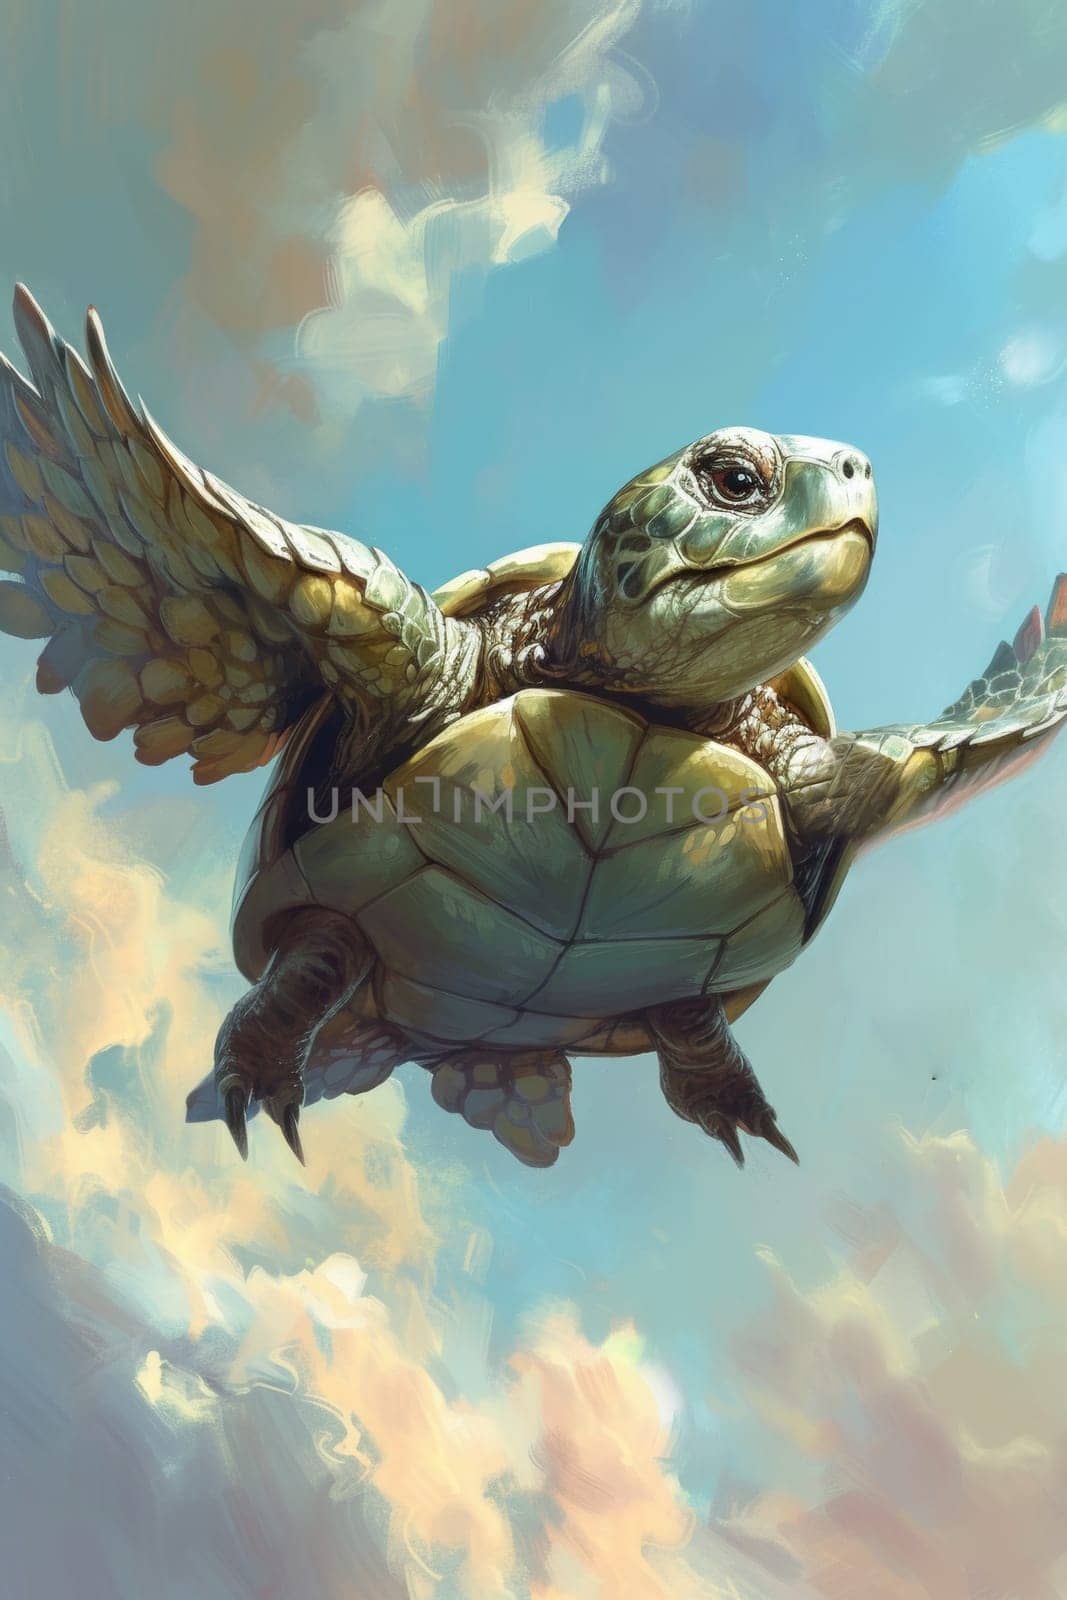 A painting of a turtle flying in the sky with clouds